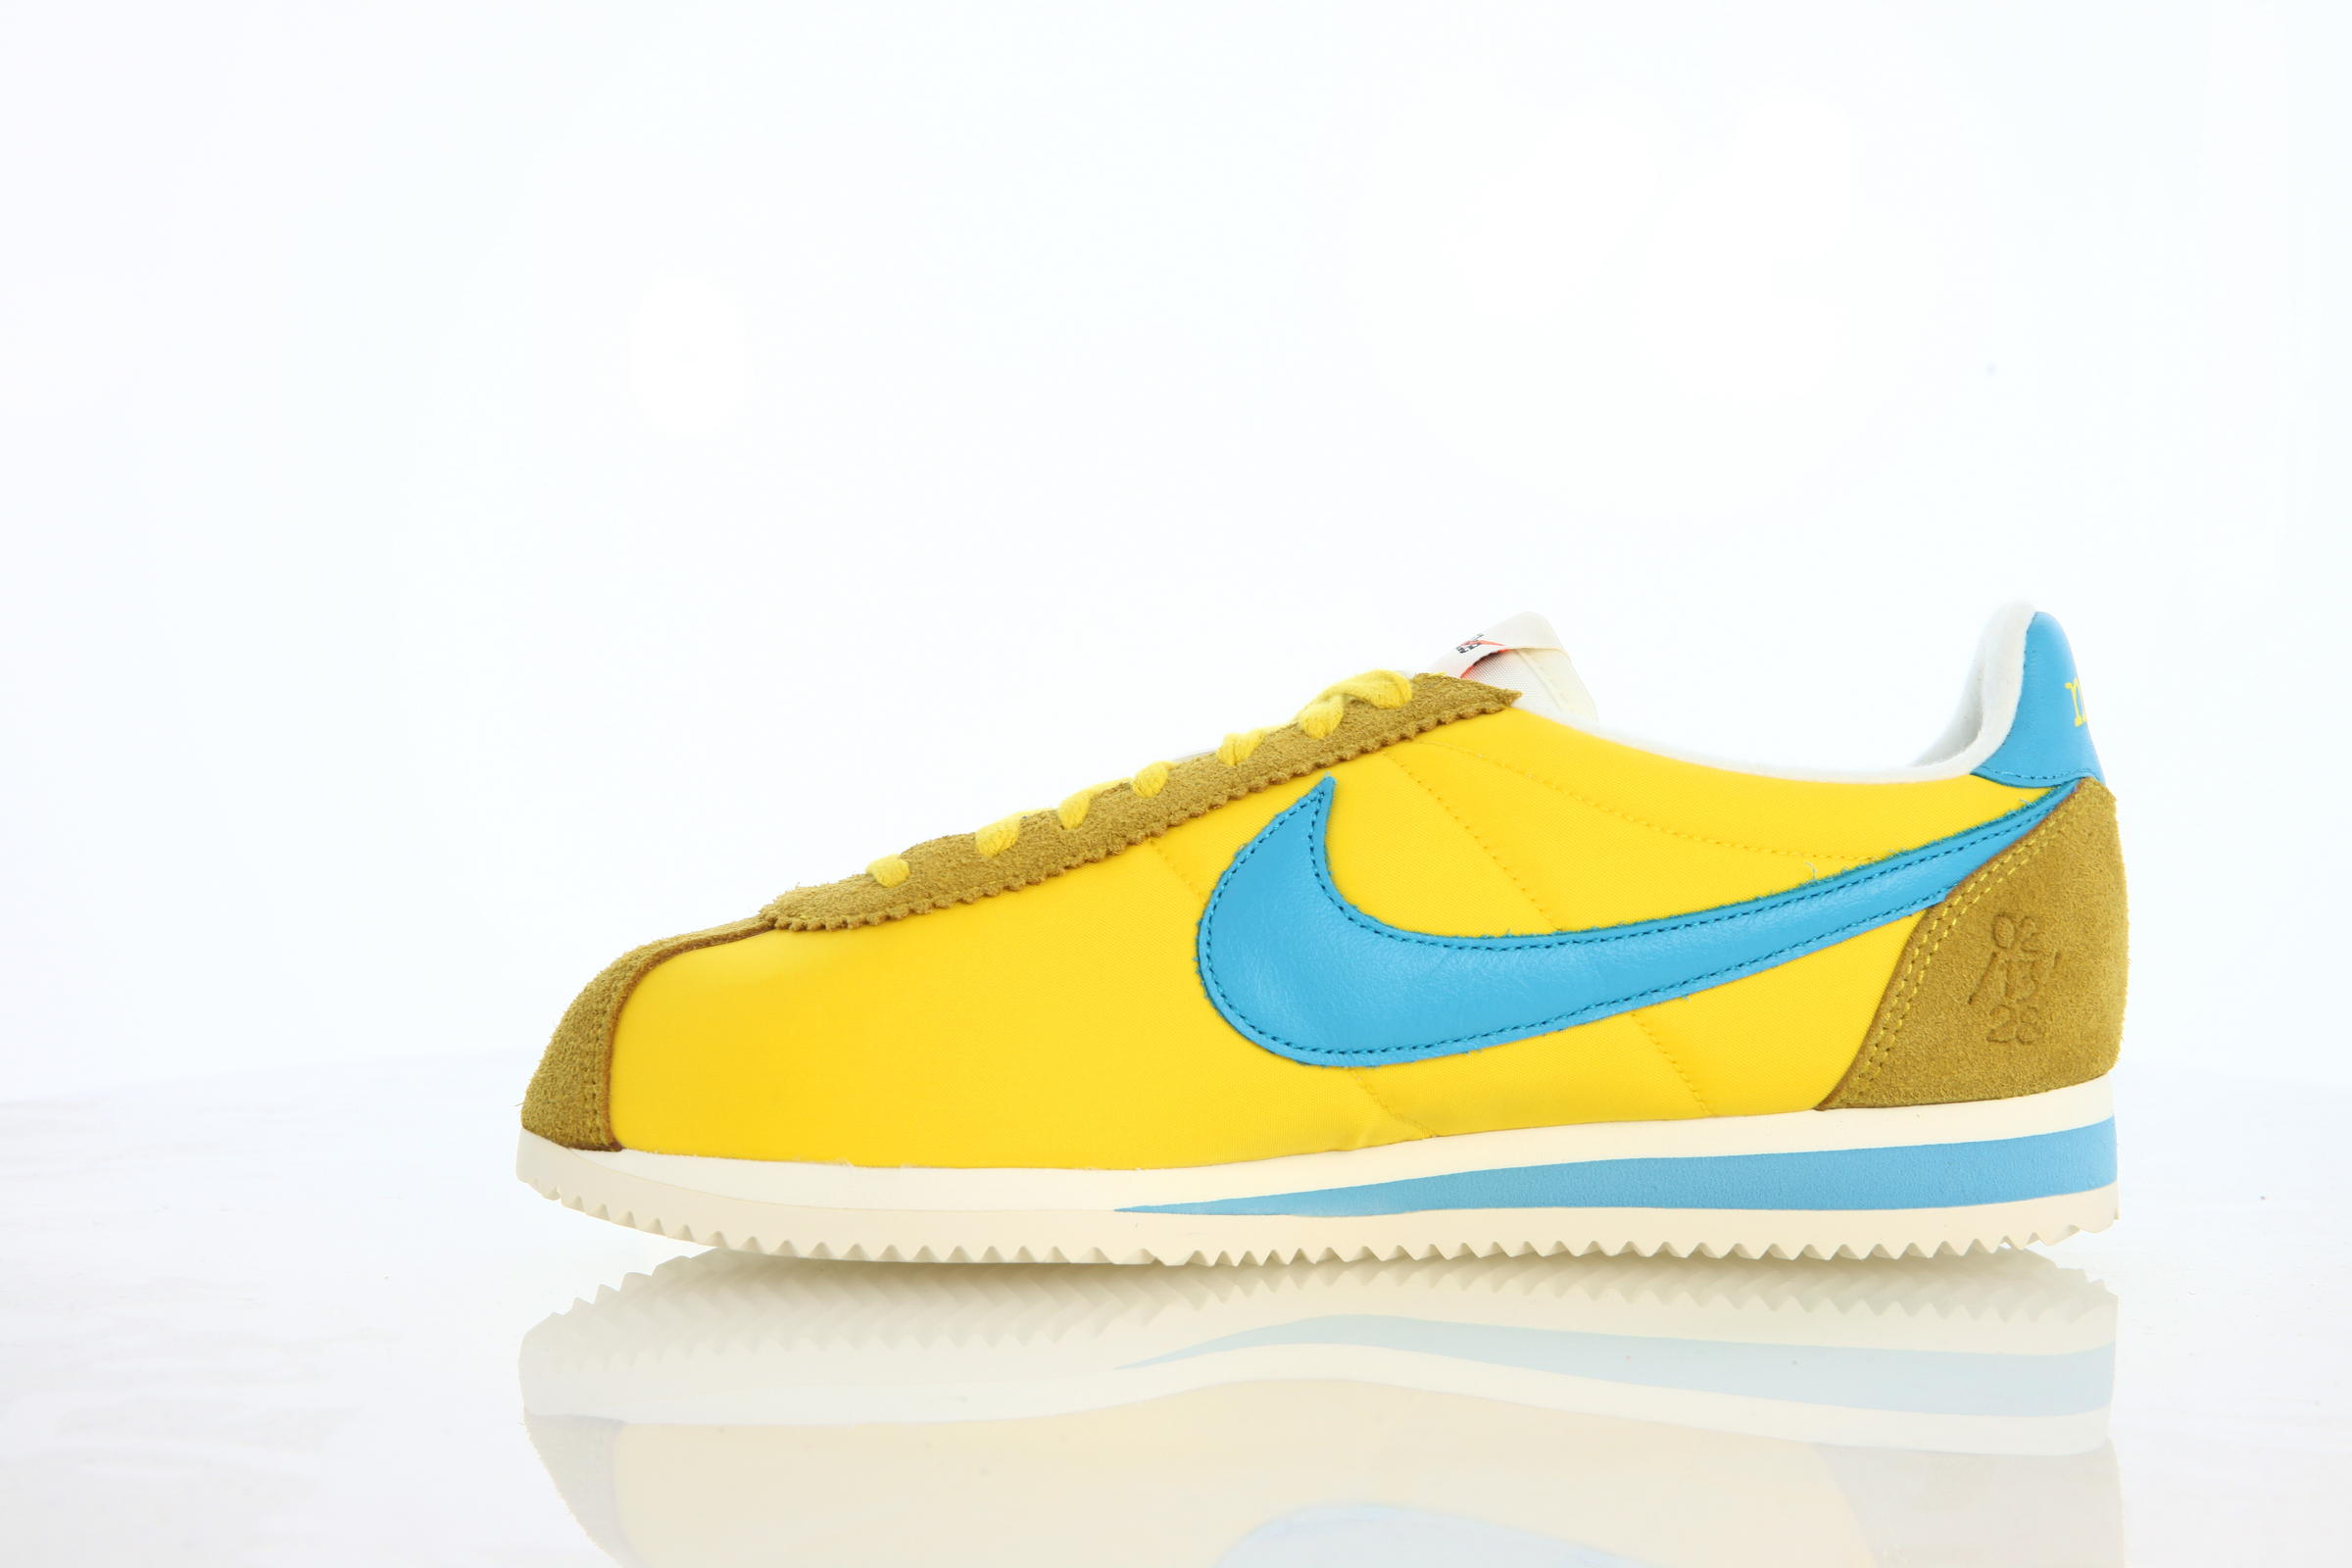 Nike Classic Cortez Nylon KM QS "Kenny Moore Collection"